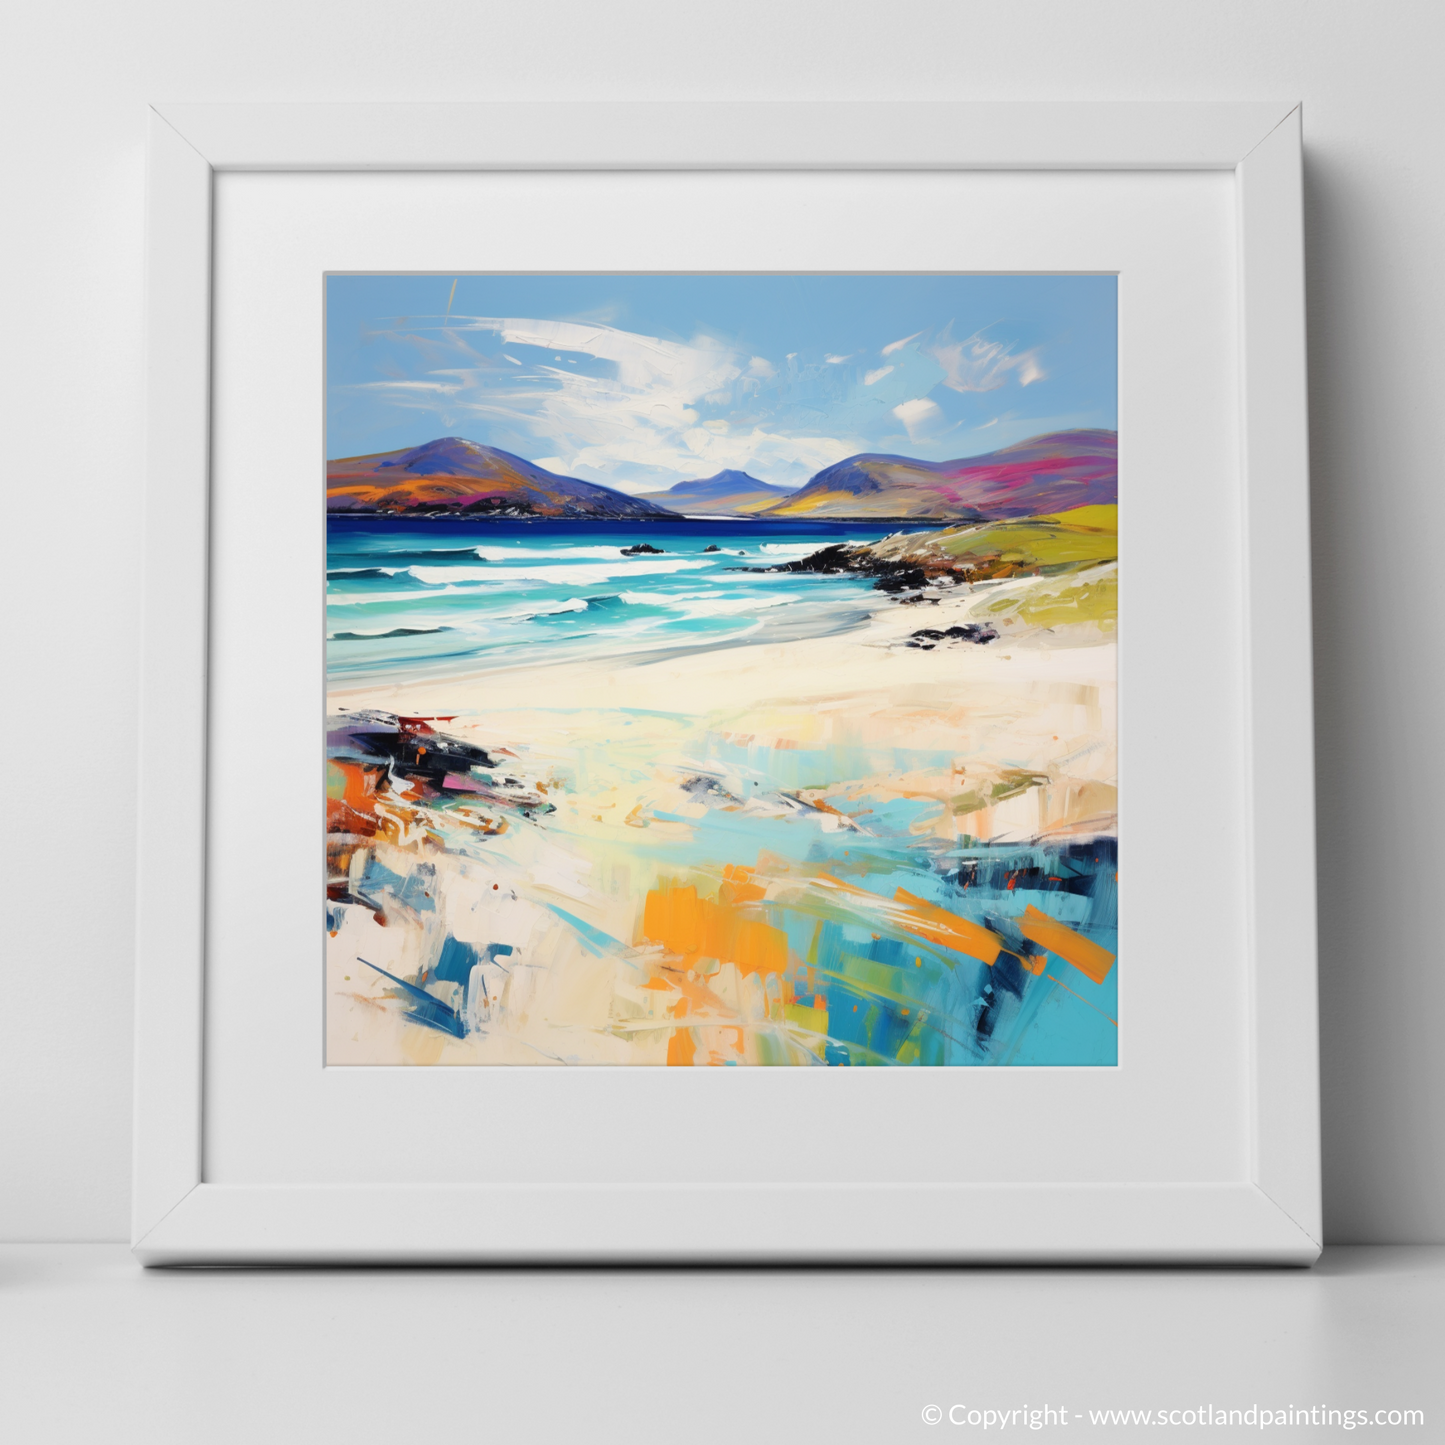 Art Print of Luskentyre Sands, Isle of Lewis with a white frame